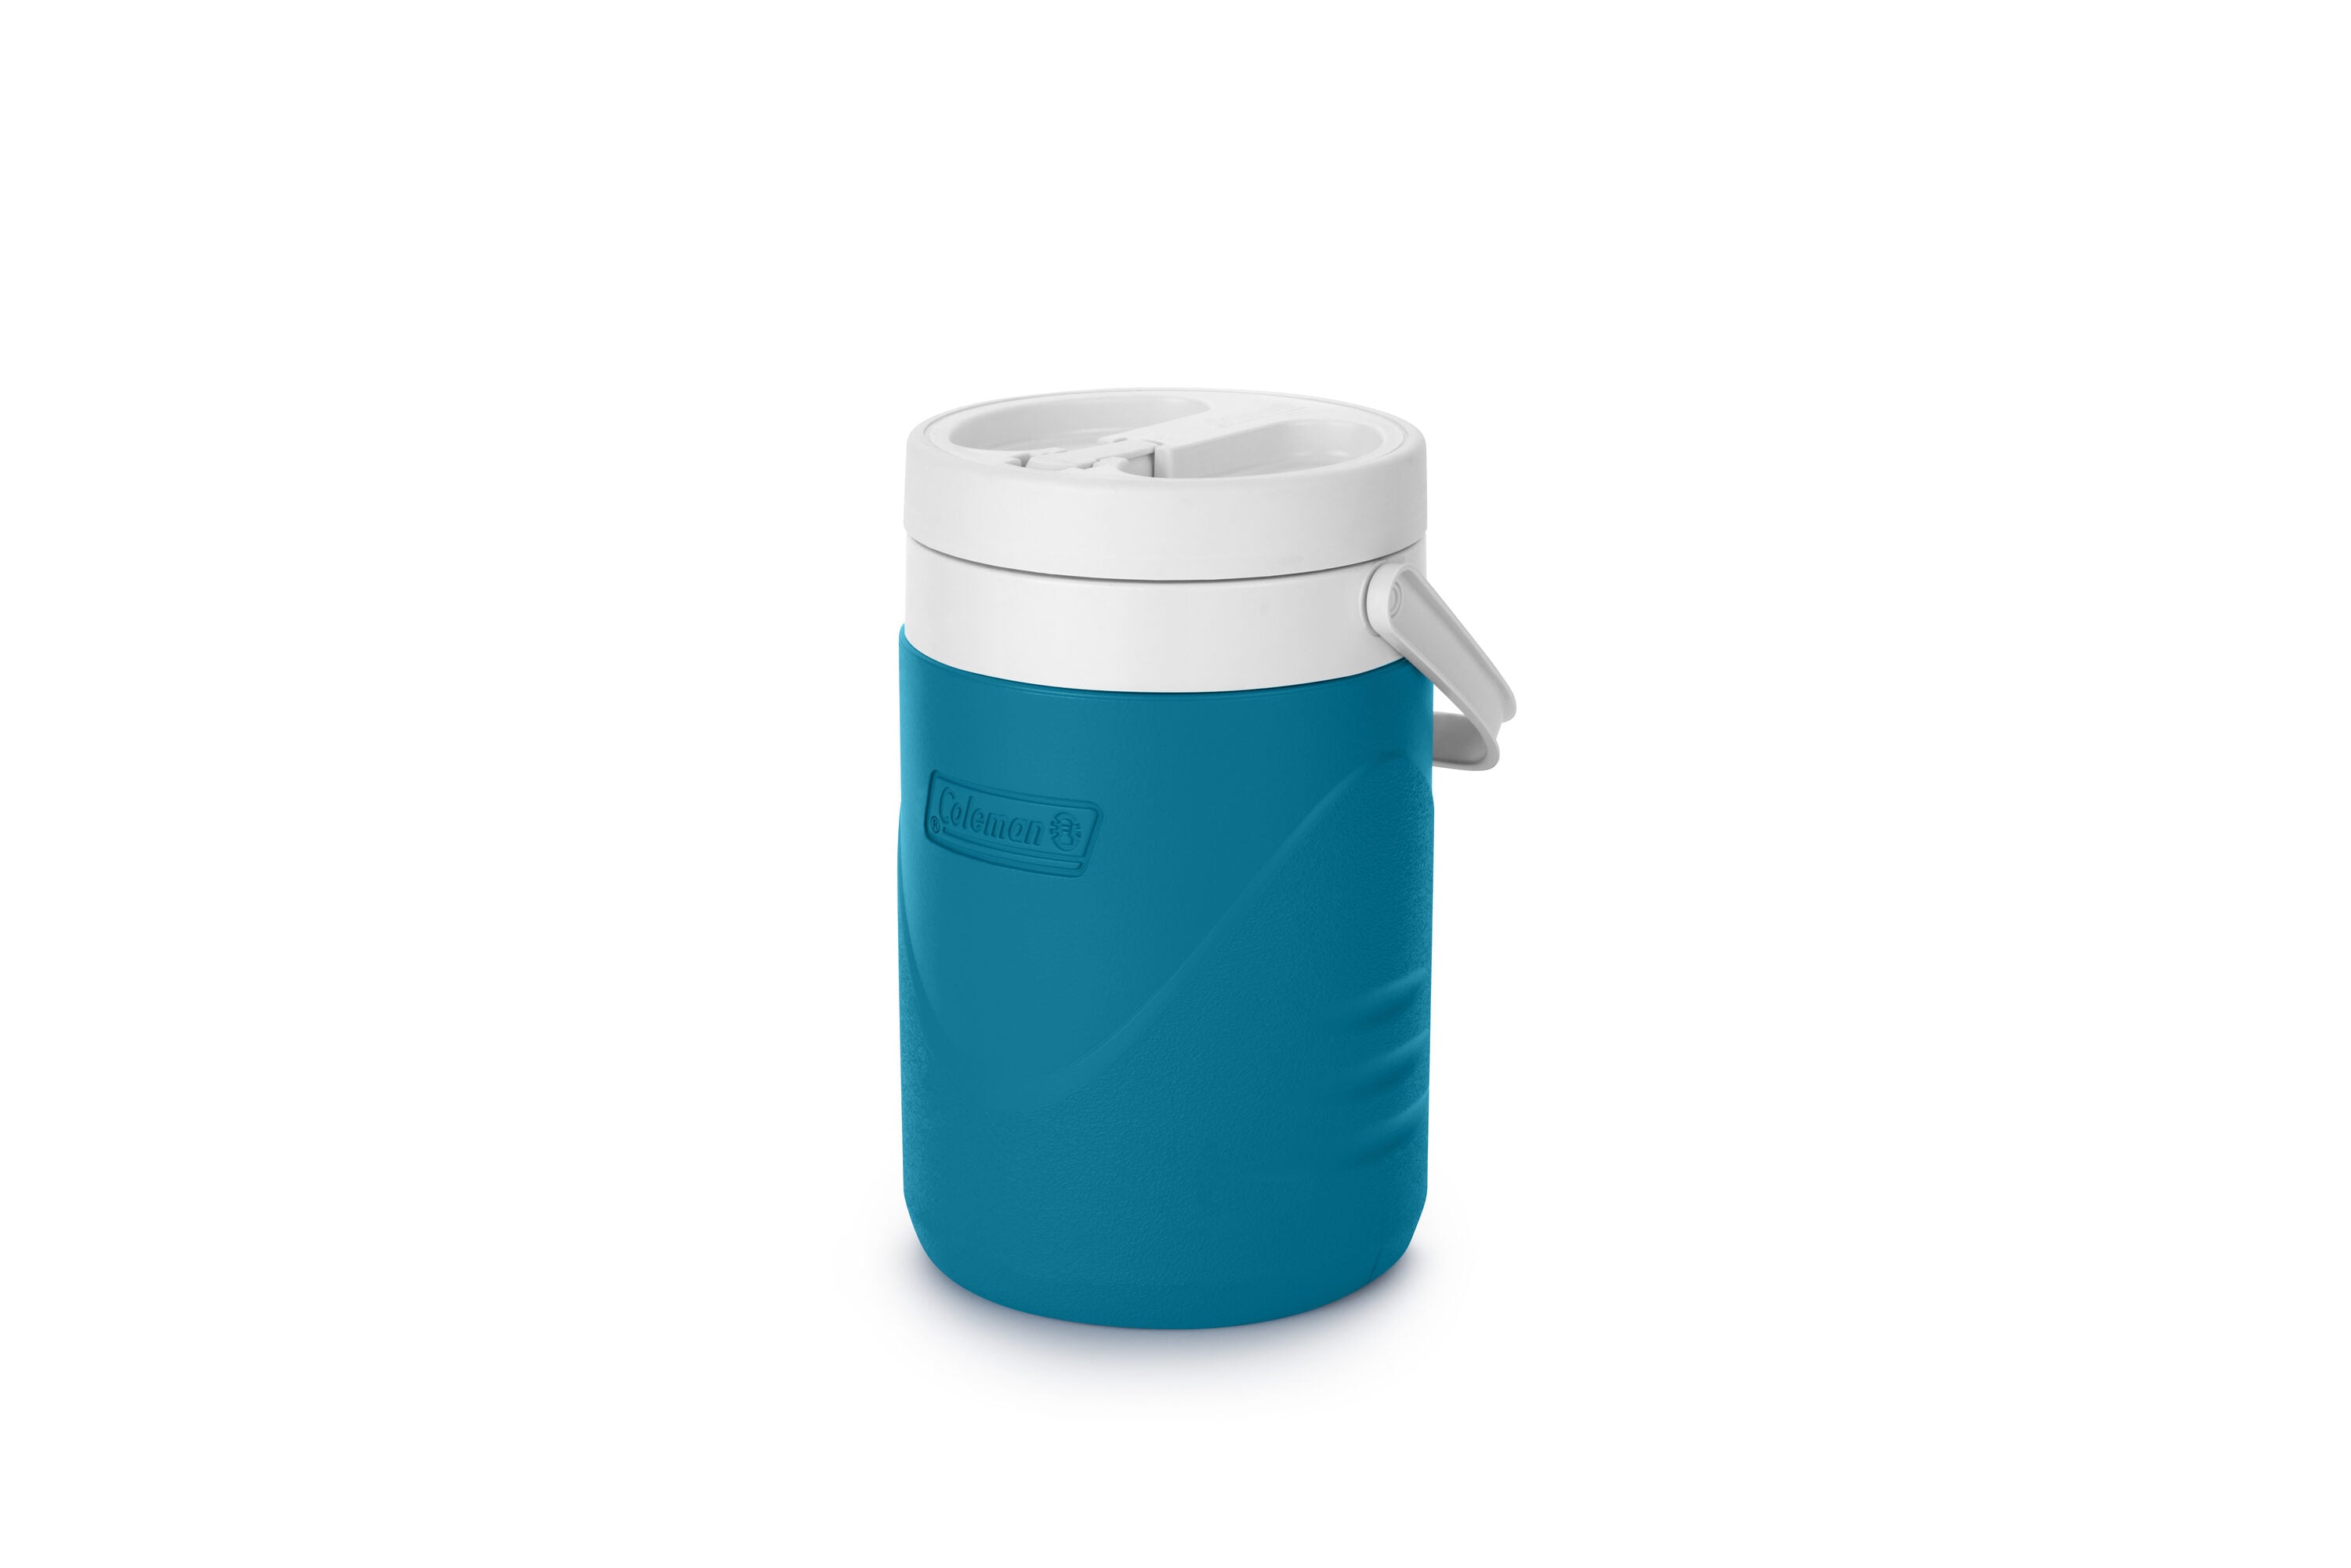 Coleman Blue Insulated Drink Carrier in the Portable Coolers department at